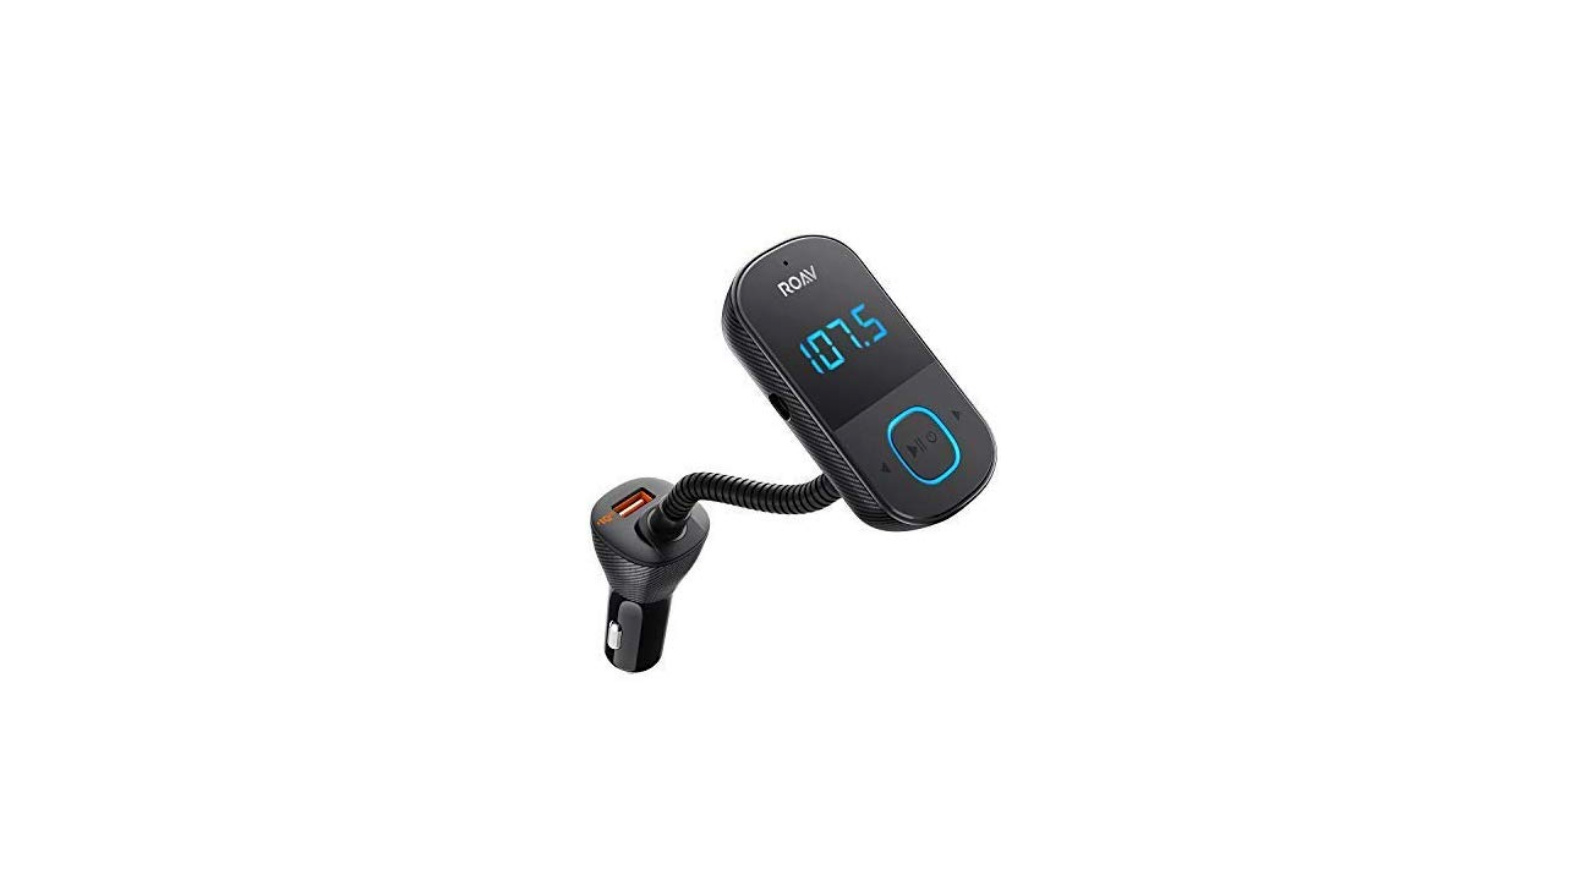 Anker Roav SmartCharge T1 mobile car accessory